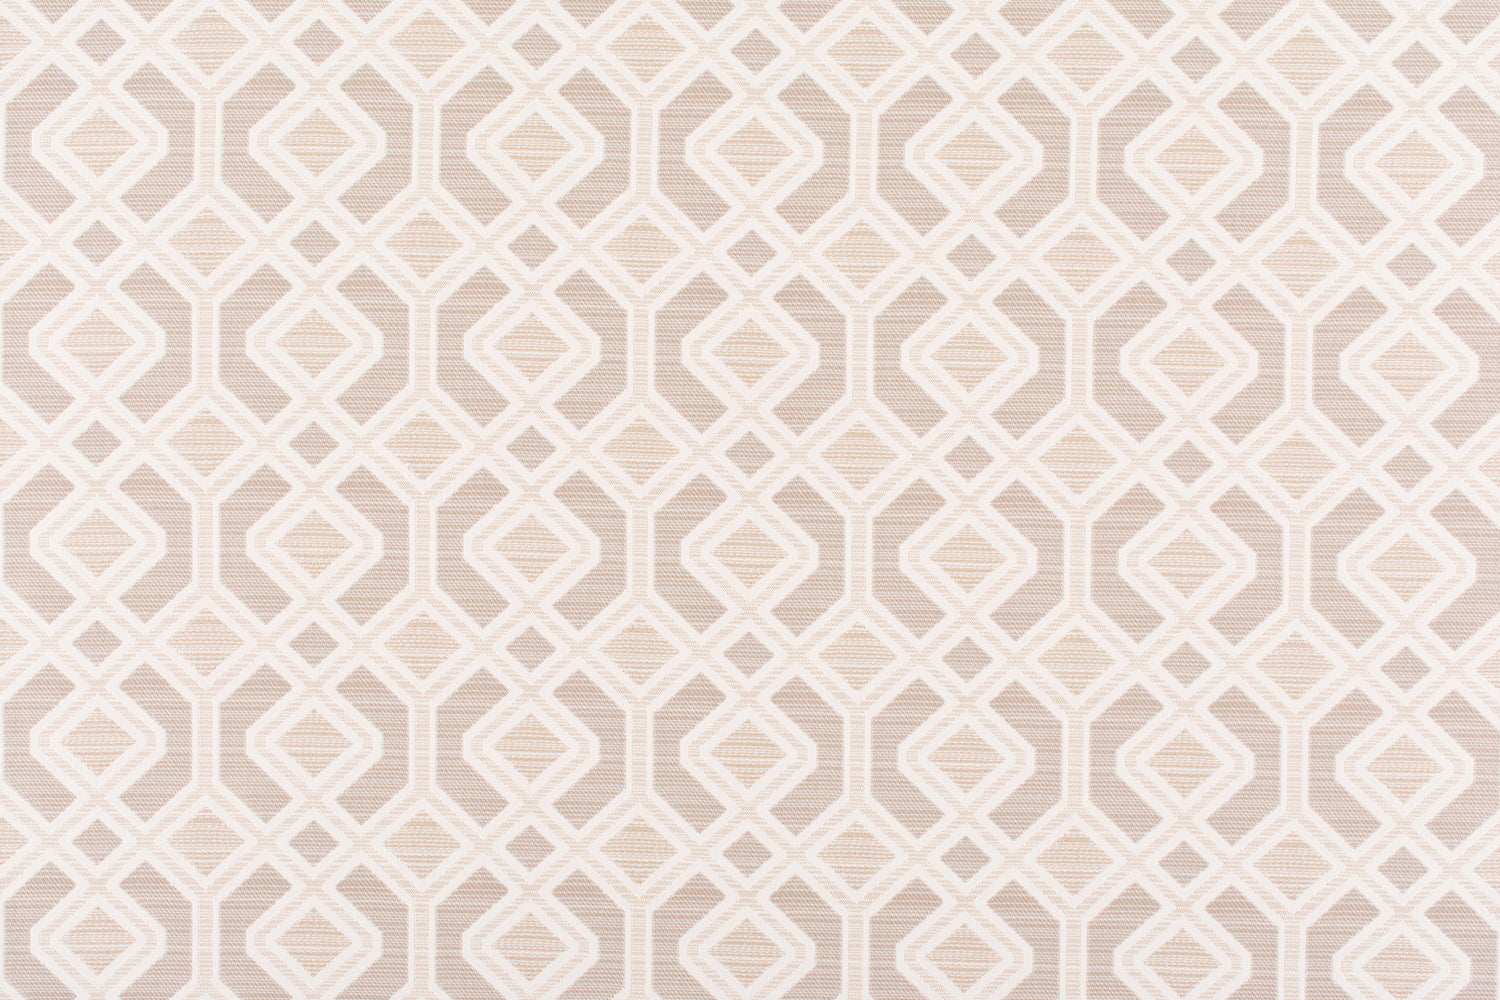 Oak Bluff fabric in dune color - pattern number WR 00052995 - by Scalamandre in the Old World Weavers collection